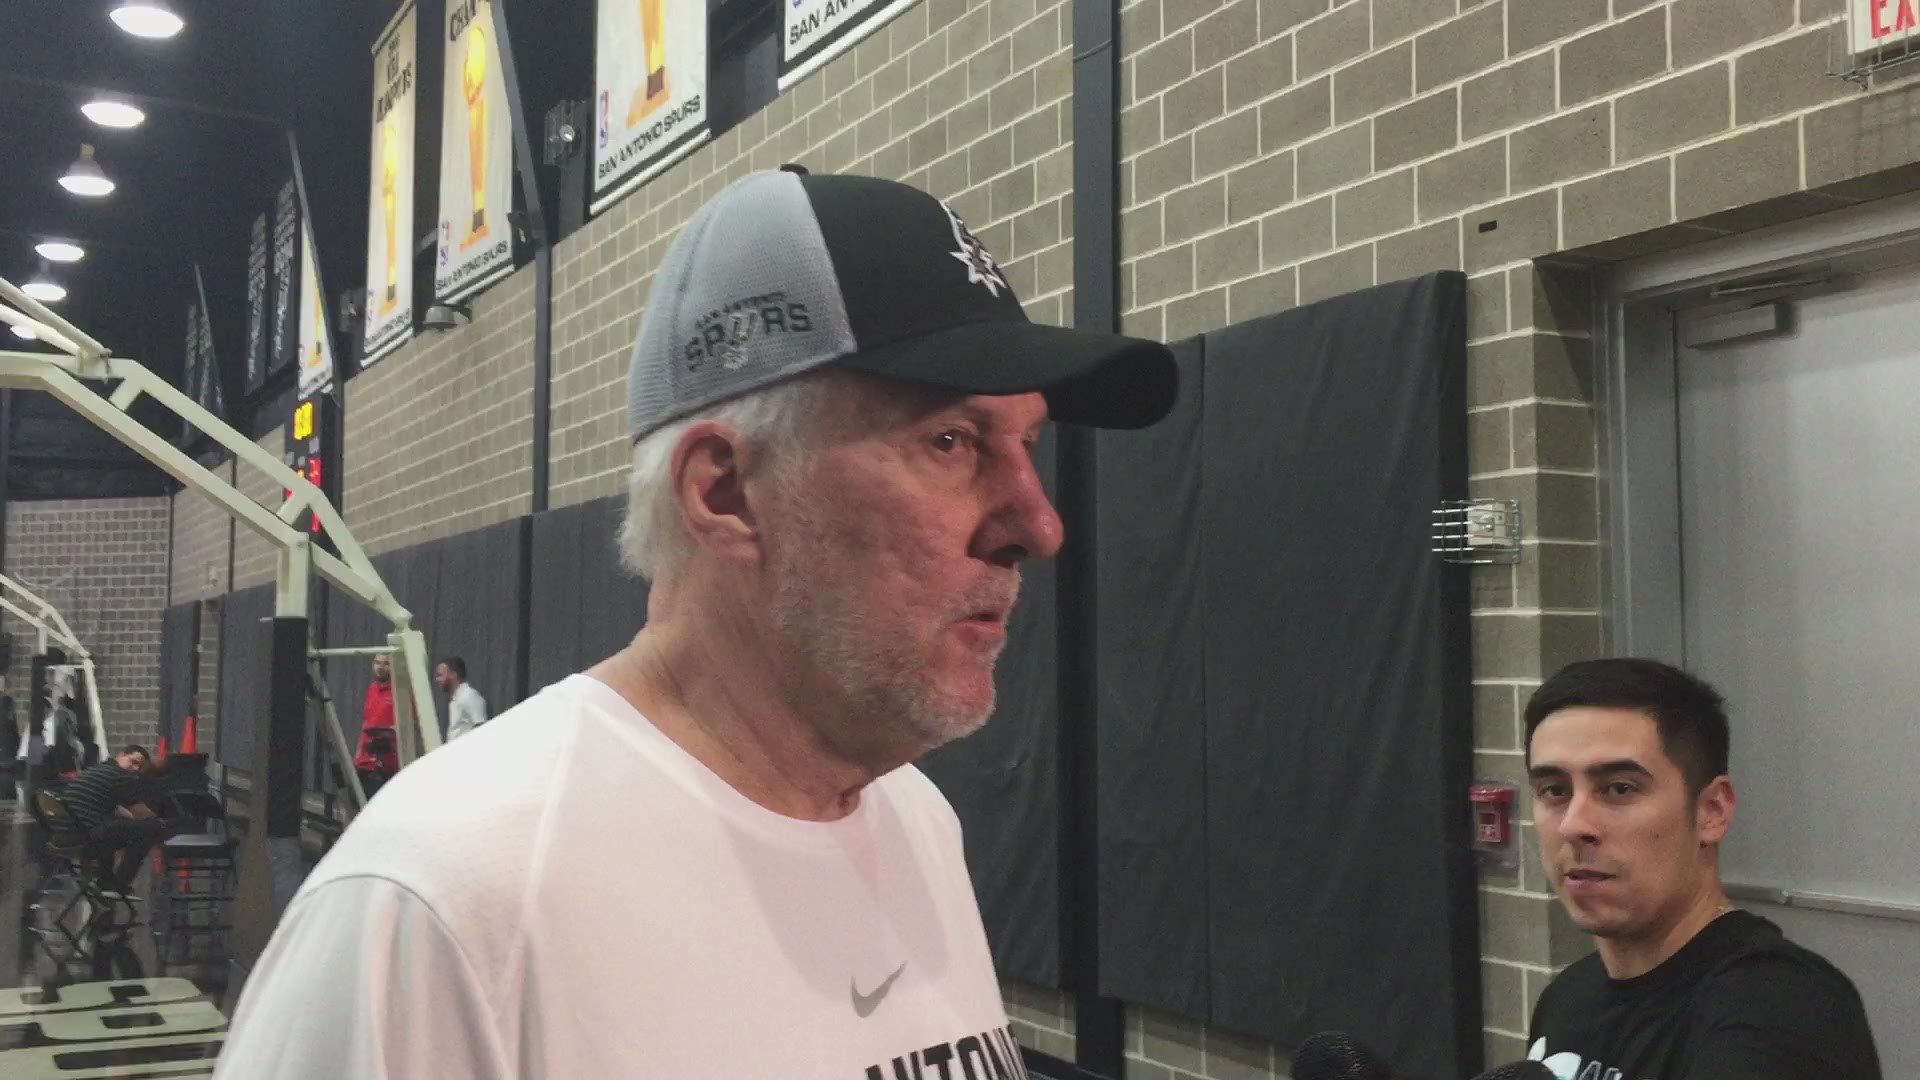 Spurs coach Gregg Popovich talks about the series with the Nuggets